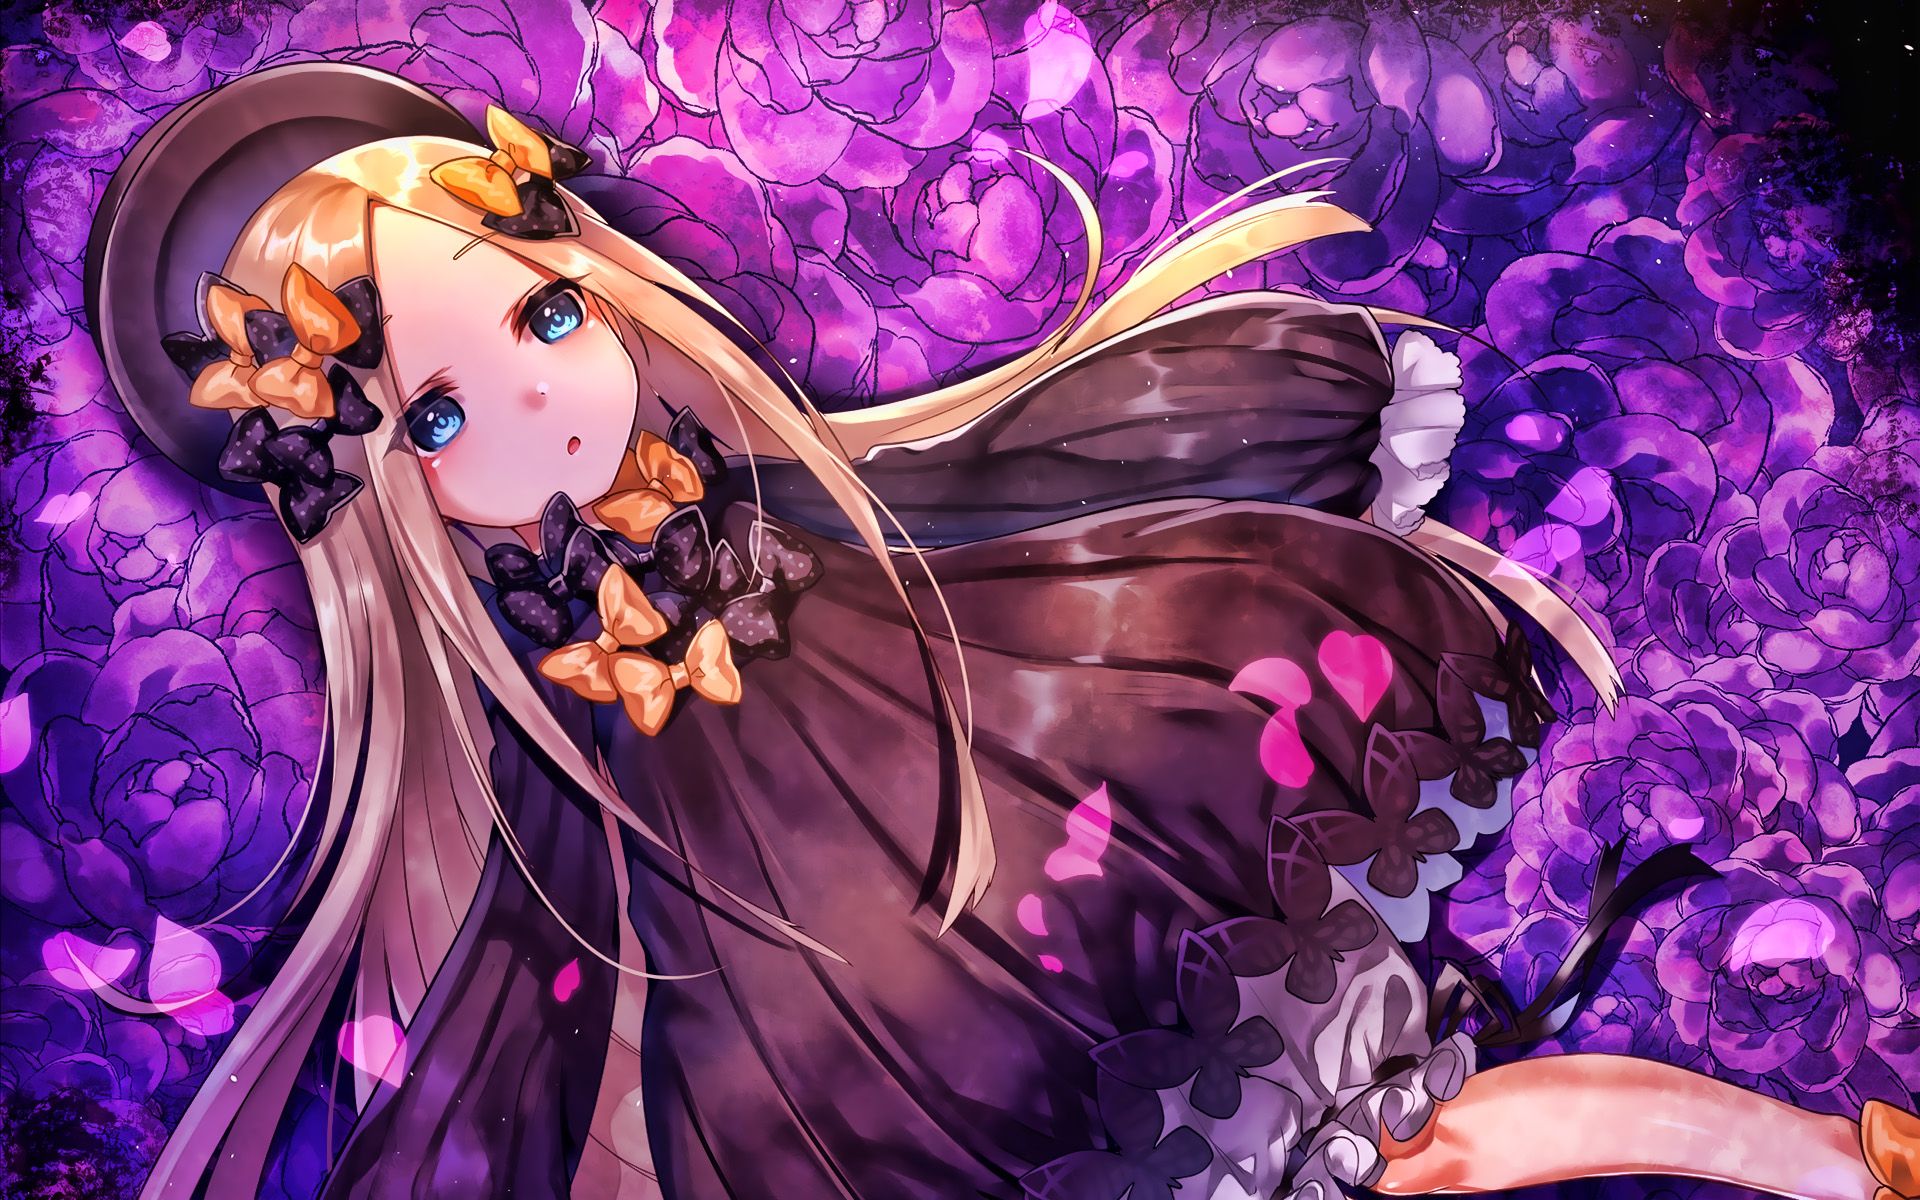 Download wallpapers Abigail Williams, violet flowers, Fate Grand